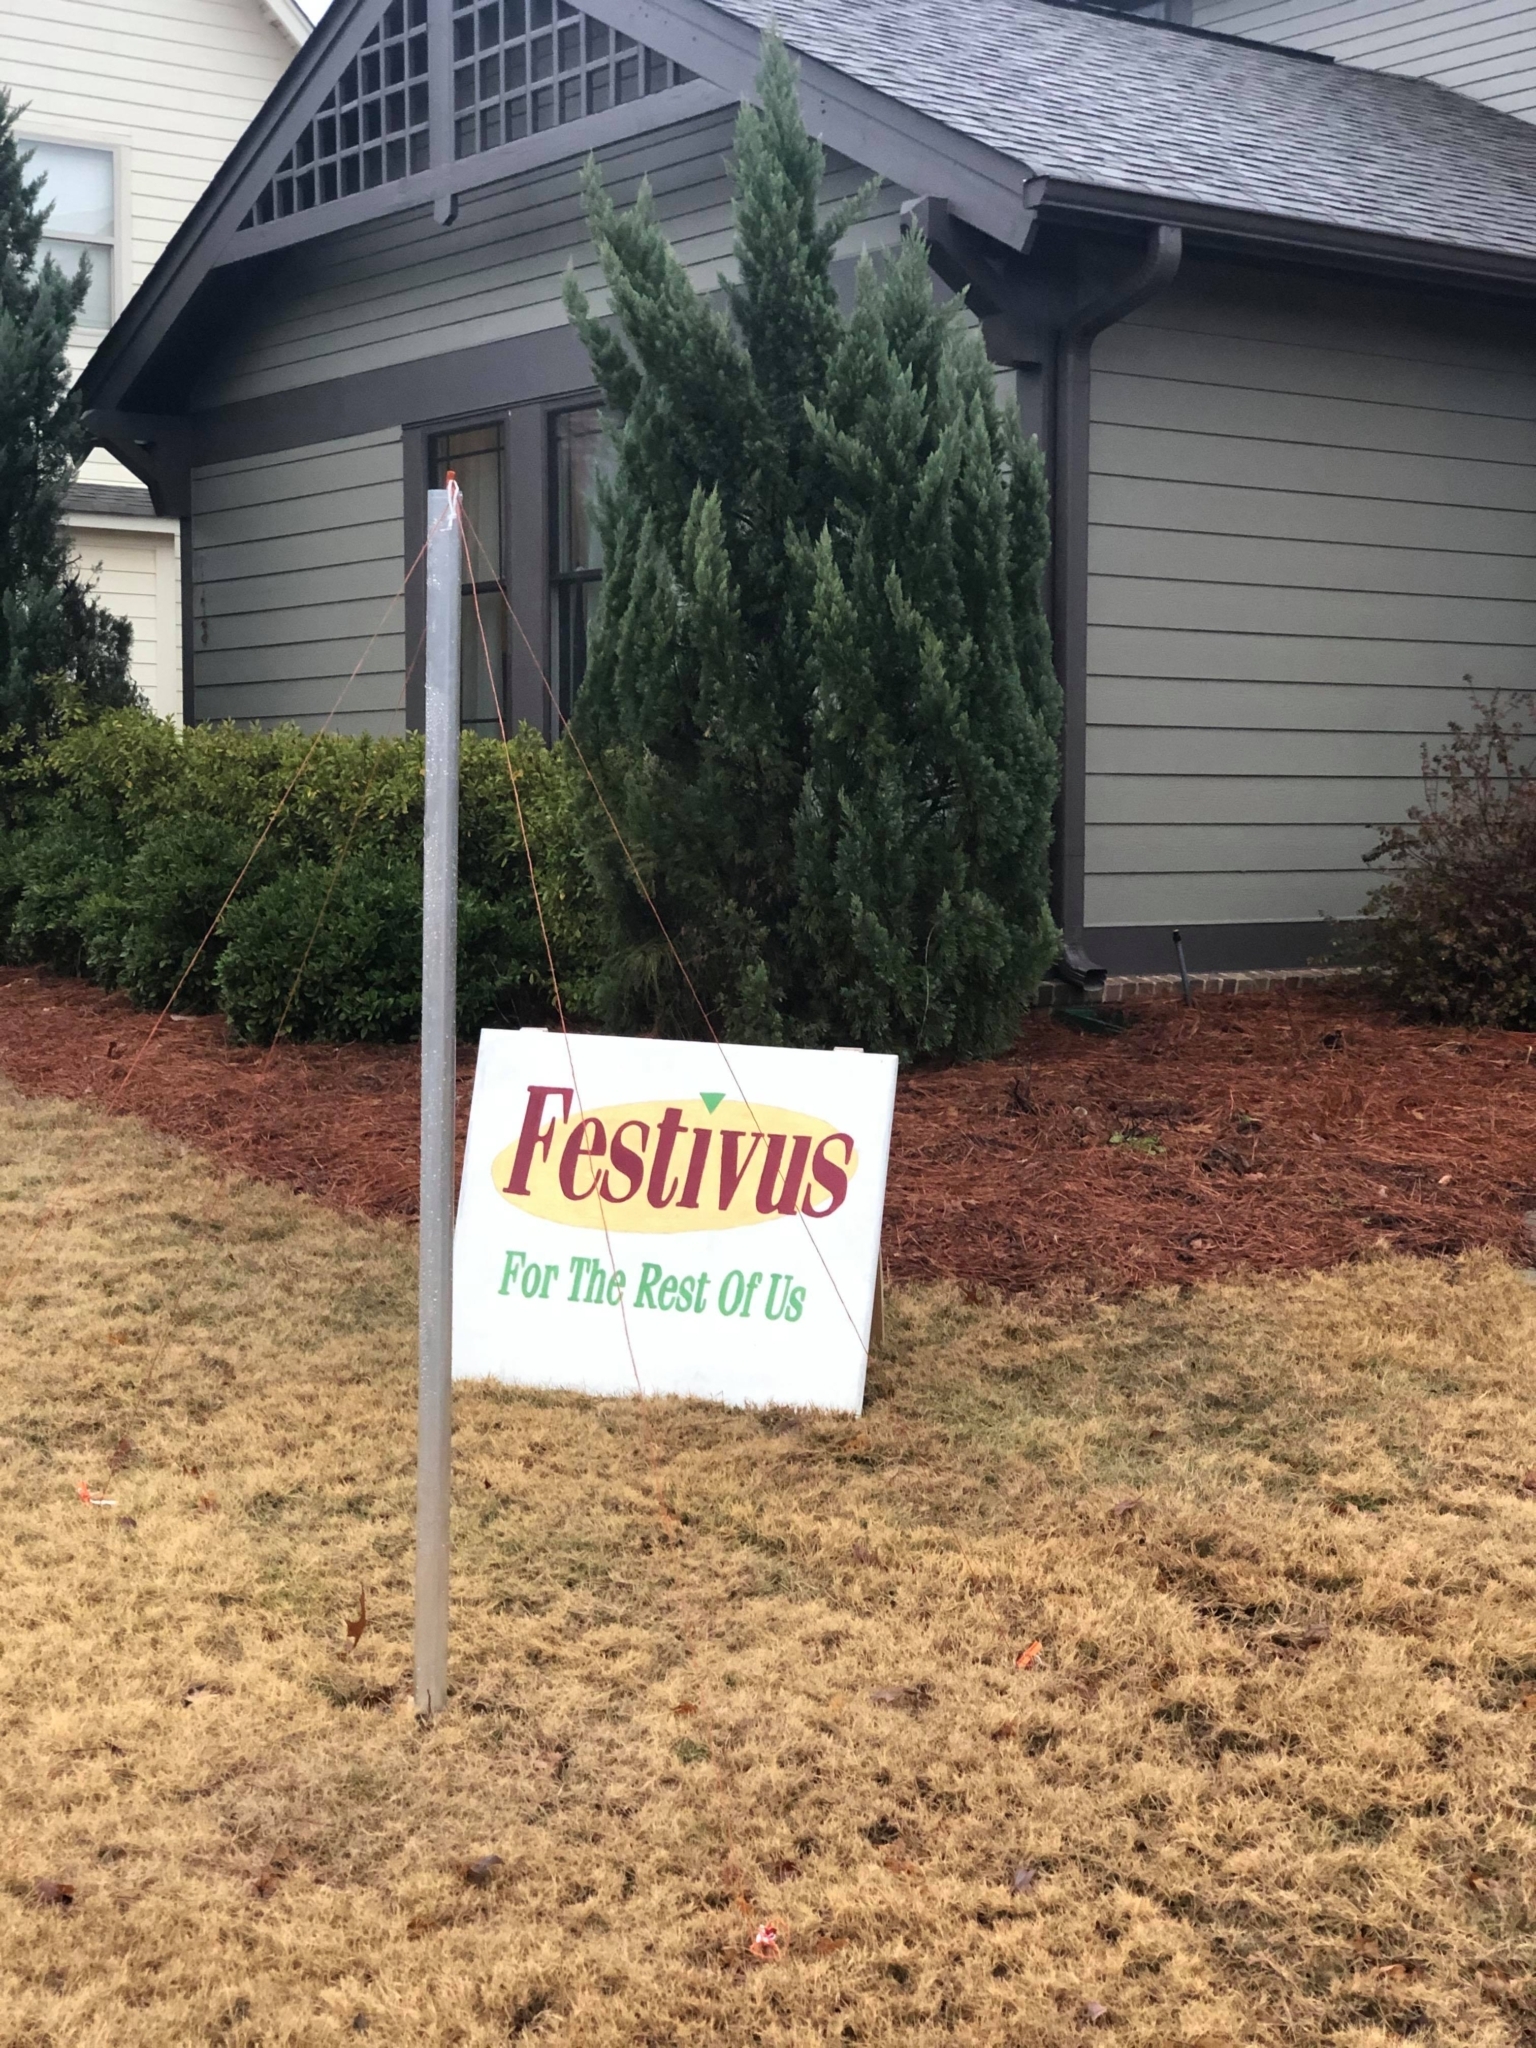 80276178 1267362856772209 1758761052985622528 n It's a Festivus miracle! We found 2 poles. Celebrate the Seinfeld-inspired holiday on Dec. 23